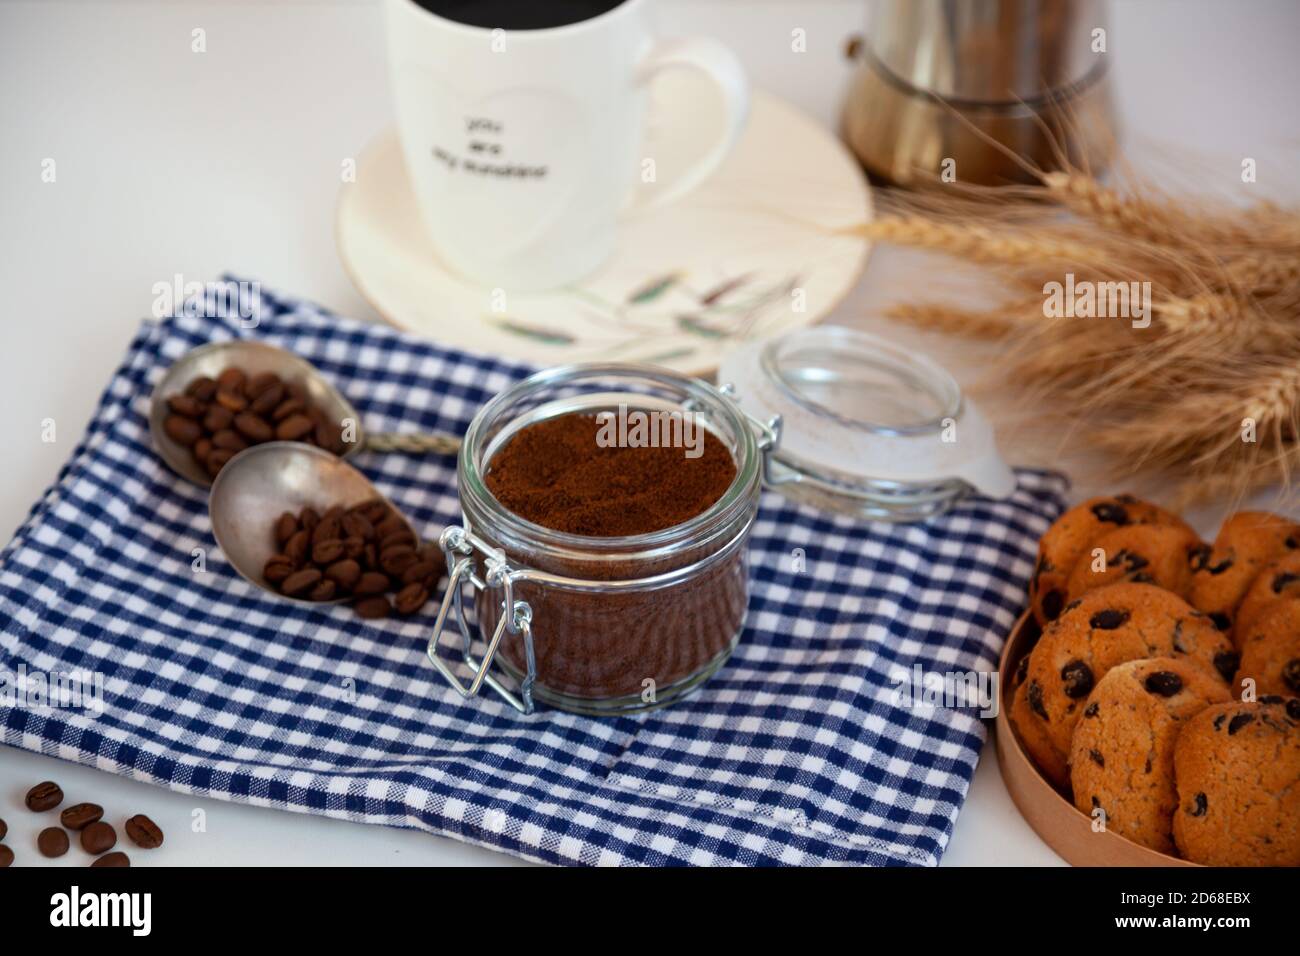 Coffee bean, ood background. Still life withcookies. Breakfast top view. Coffee grains poured from a can on kitchen table. Coffee cup mood. Stock Photo